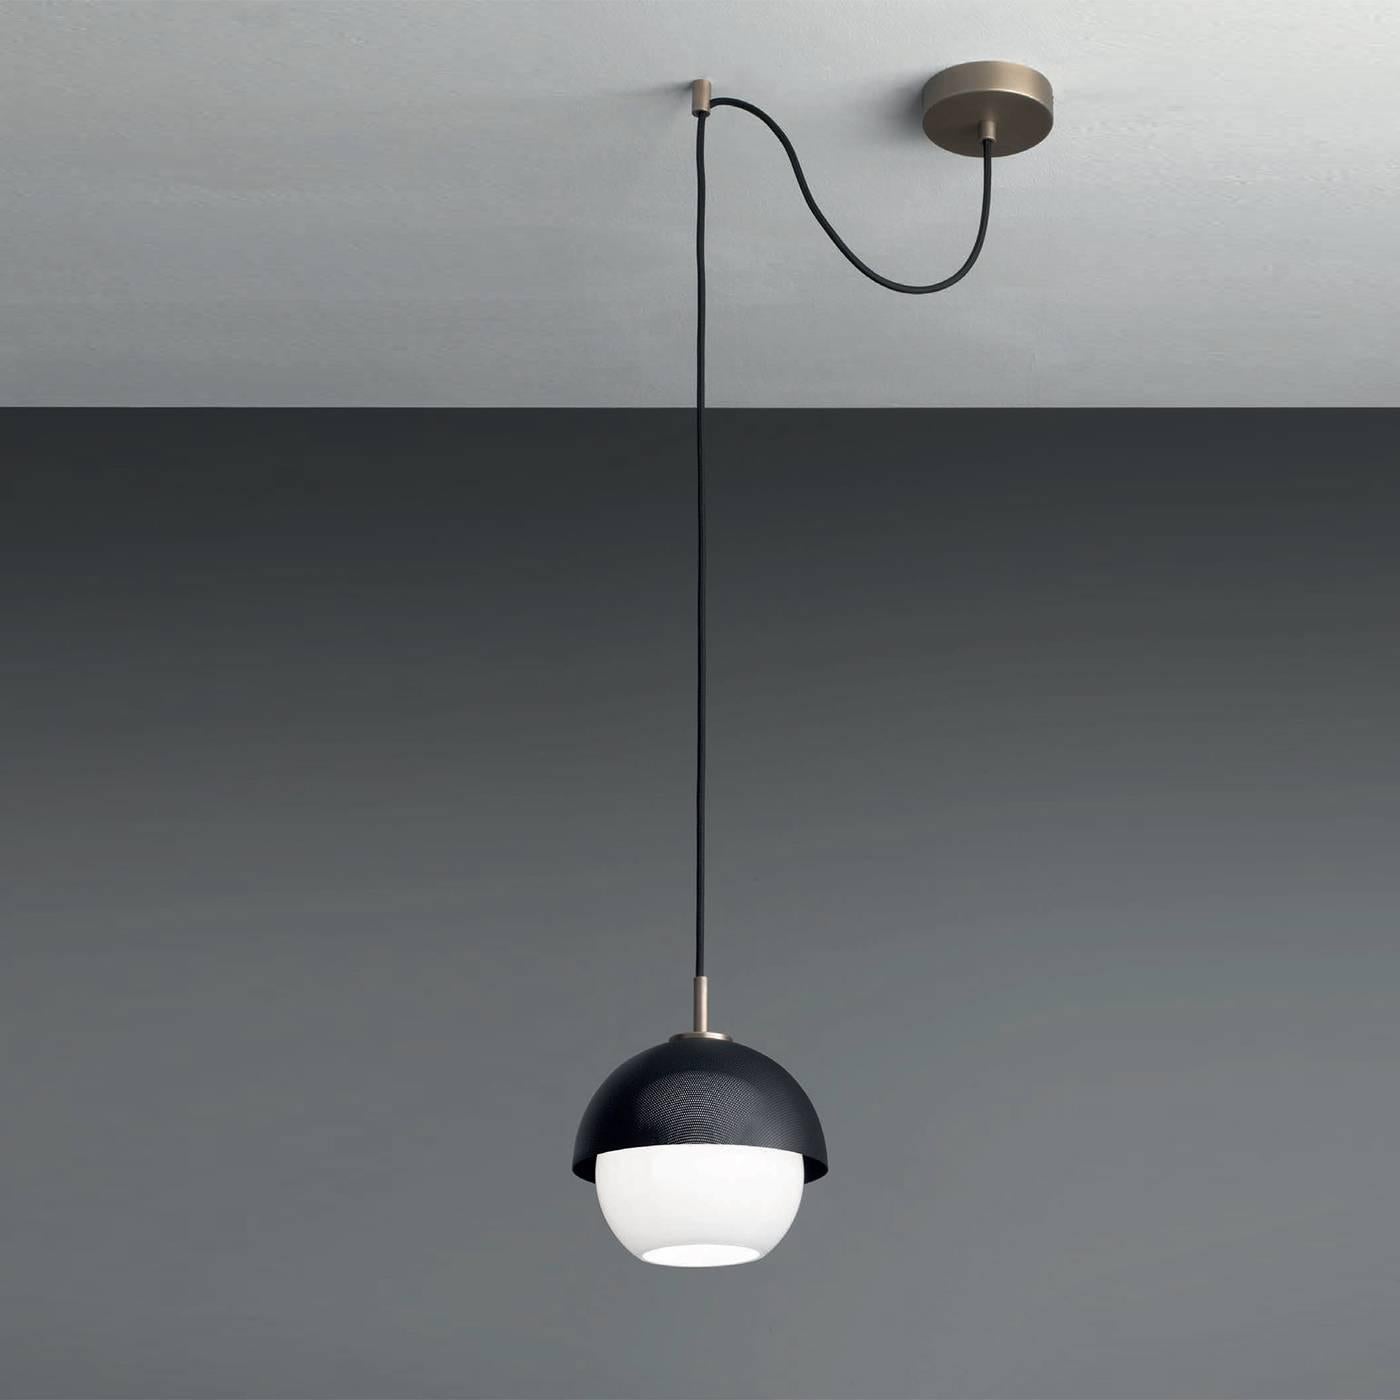 This elegant lamp uses a modern design and traditional materials to exude timeless sophistication. Its structure, that can be adjusted, is in brass with a light or dark burnished finish, while the semi-spherical shade is in metal with a matte finish